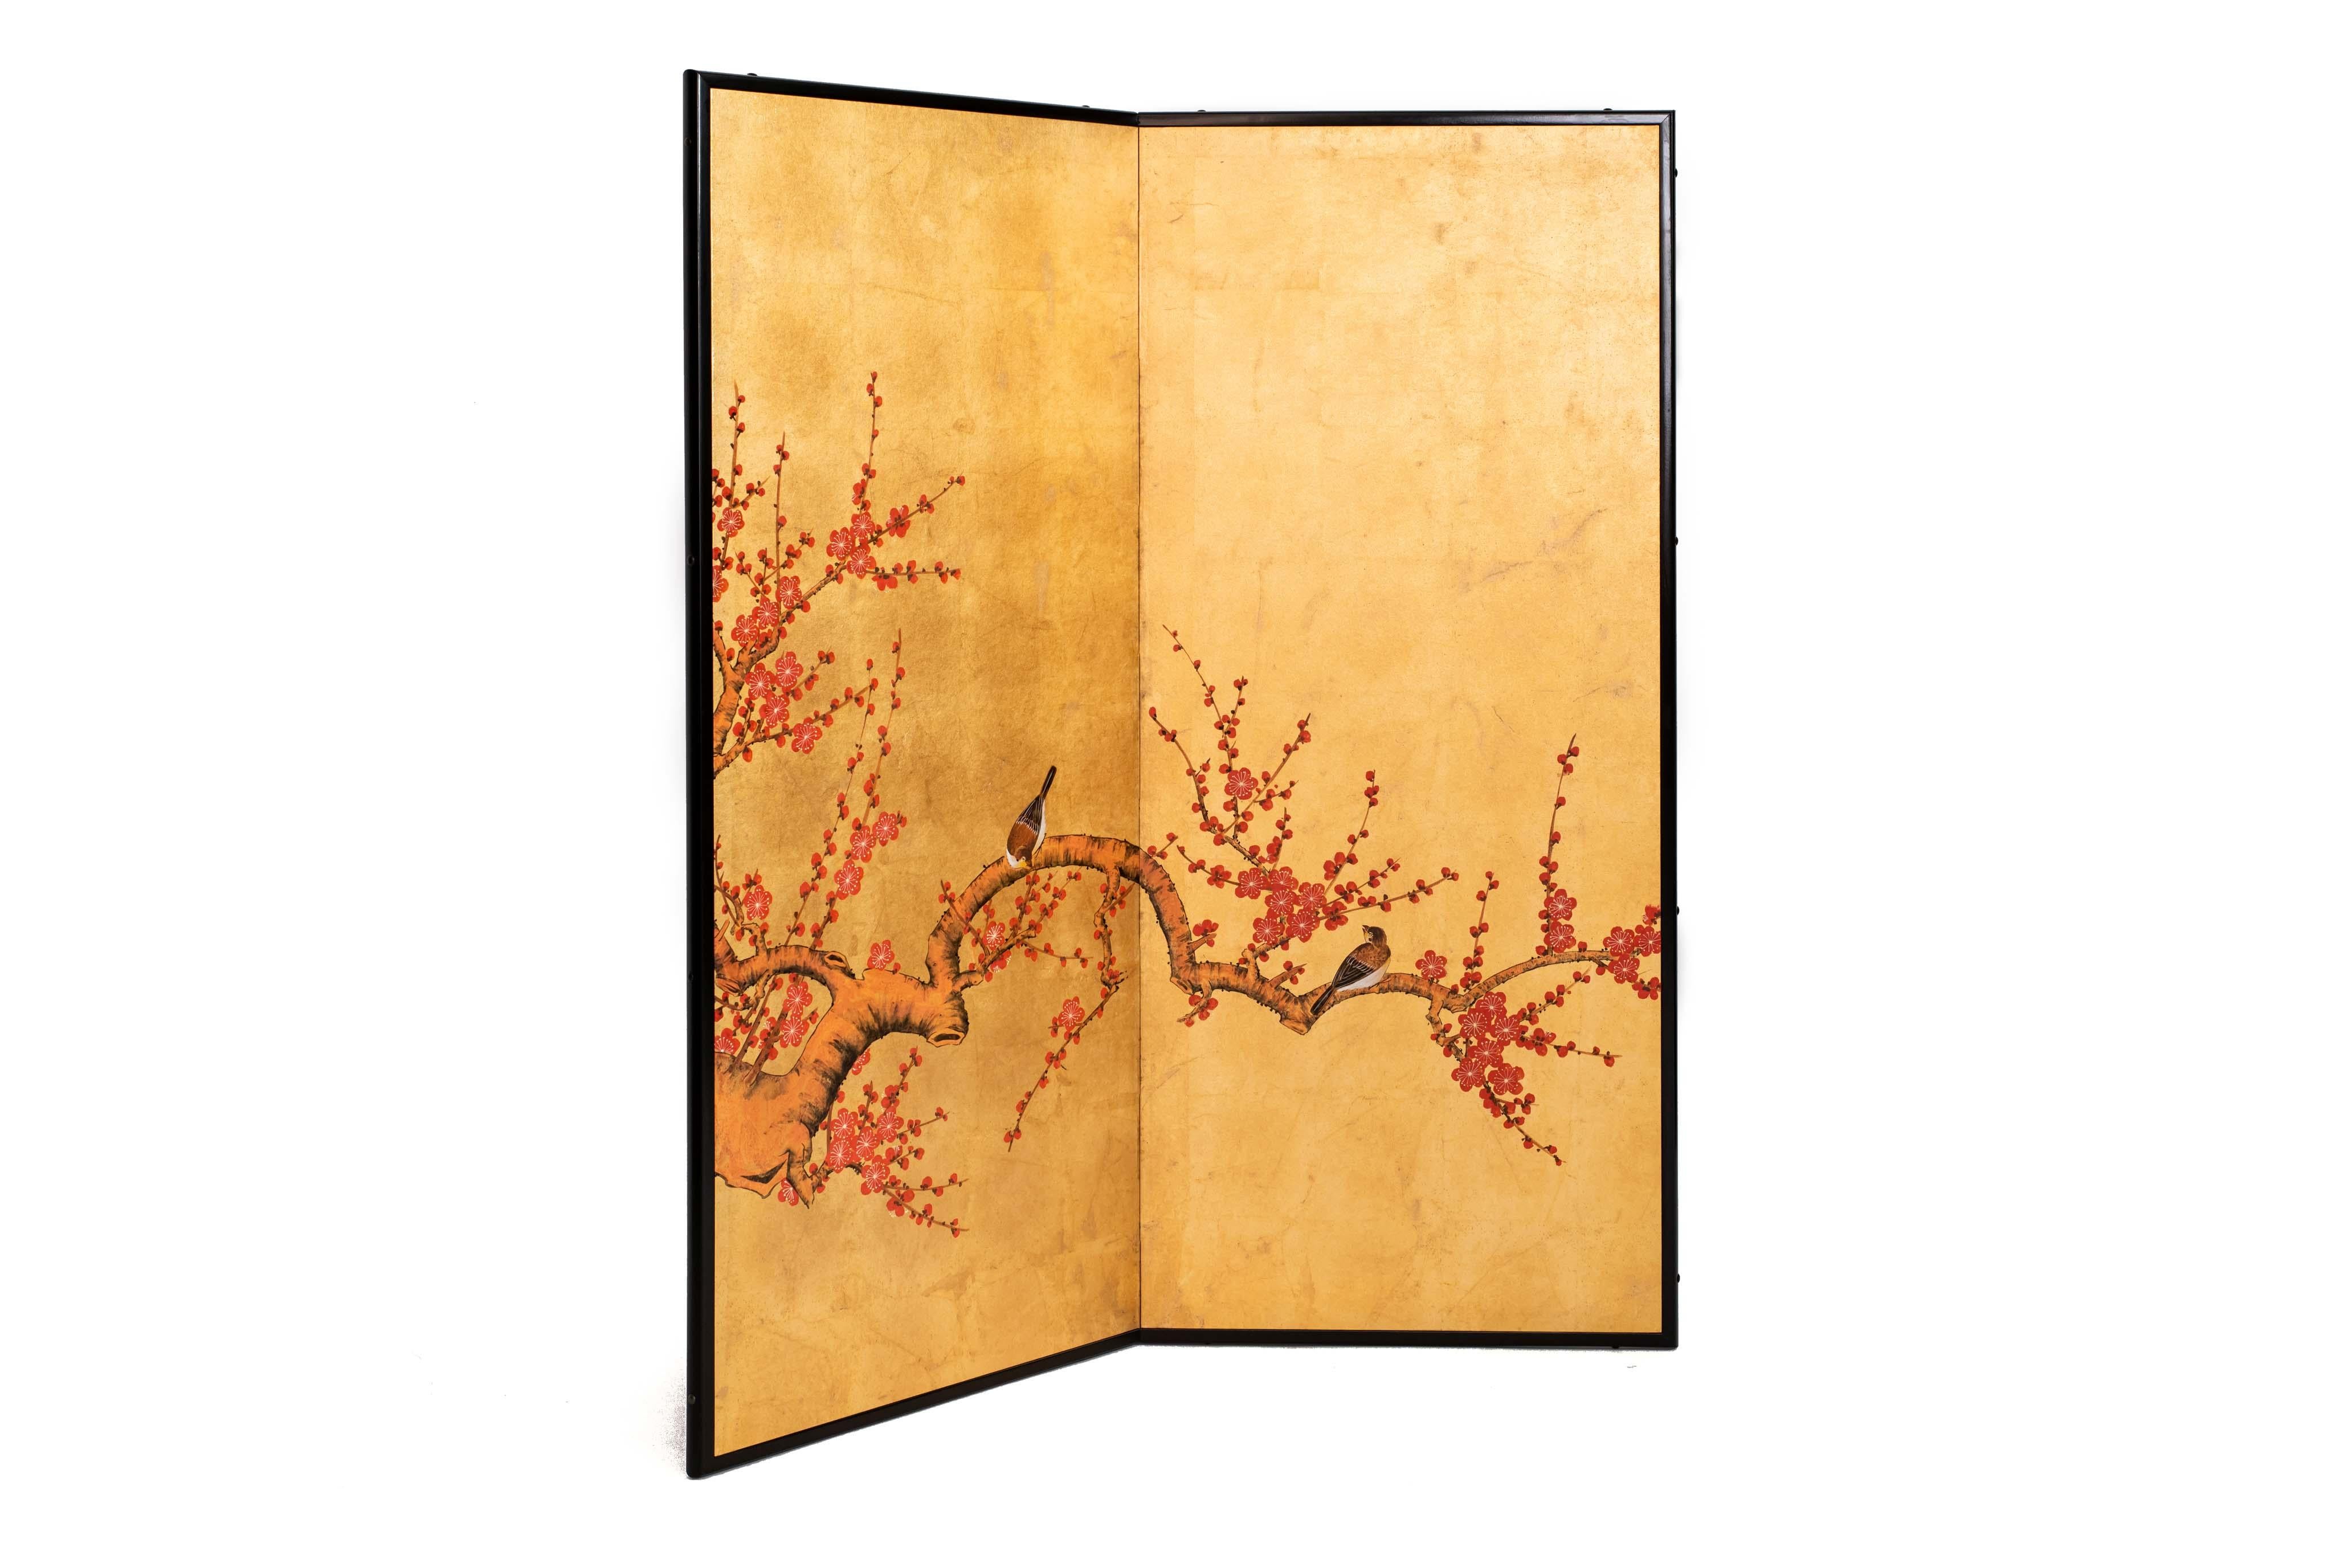 Contemporary Hand-Painted Japanese Screen of Red Plum Blossom and Birds 1